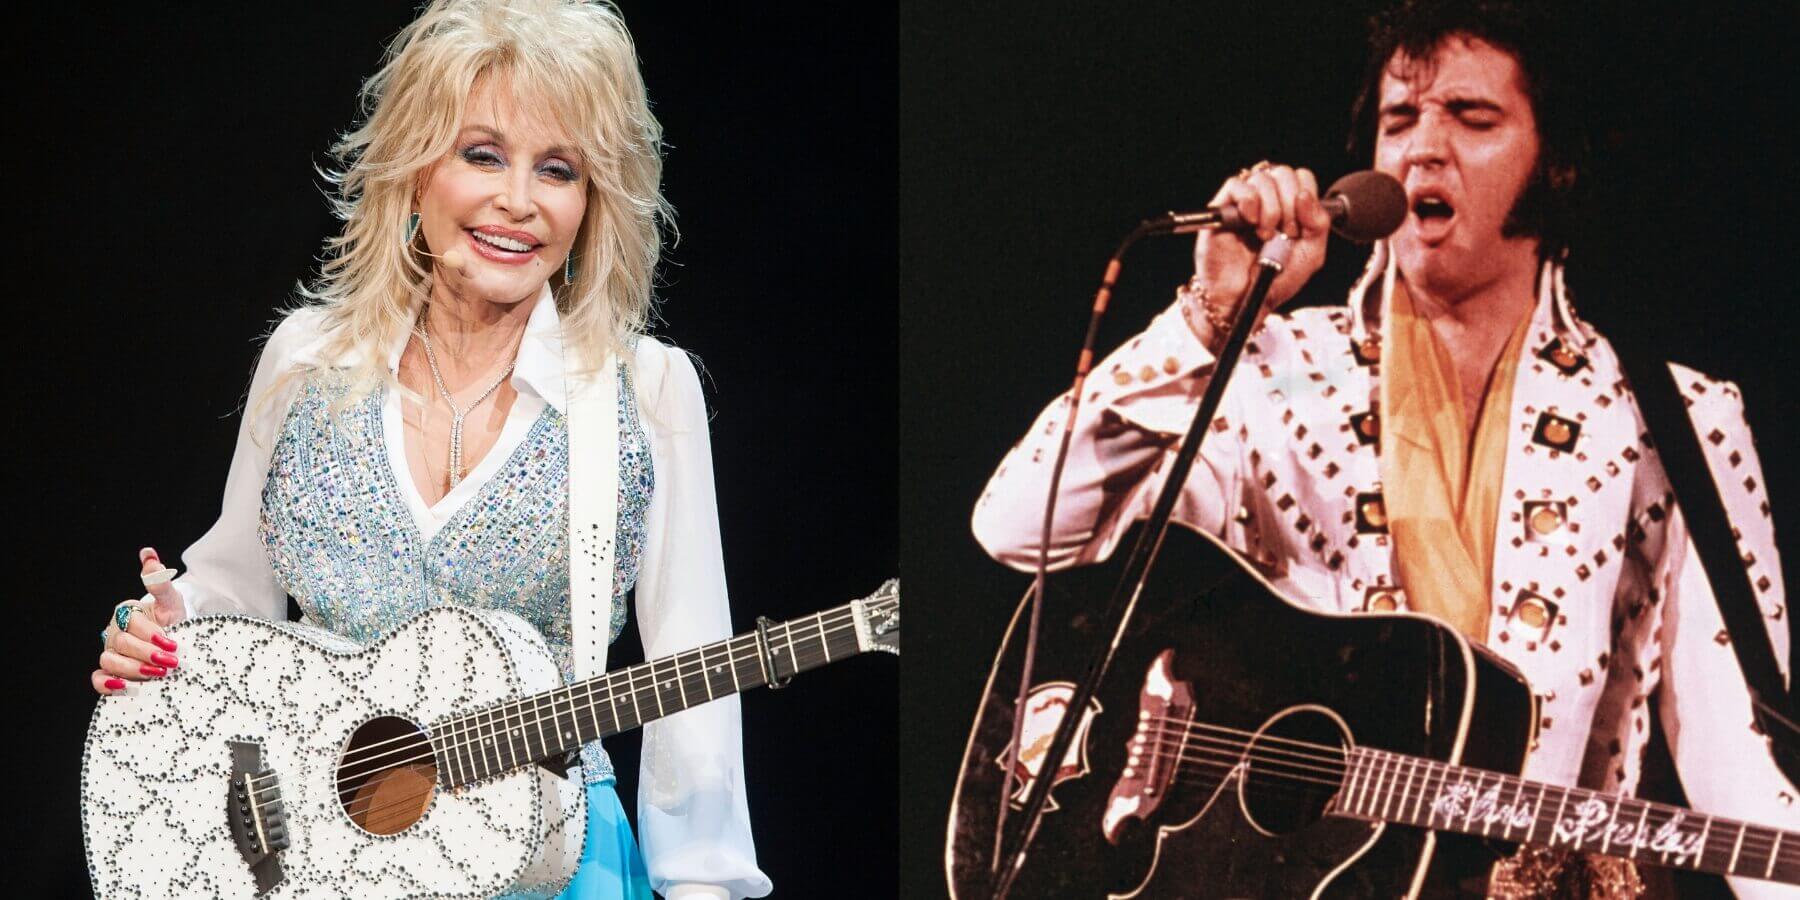 Dolly Parton and Elvis Presley in side-by-side photographs